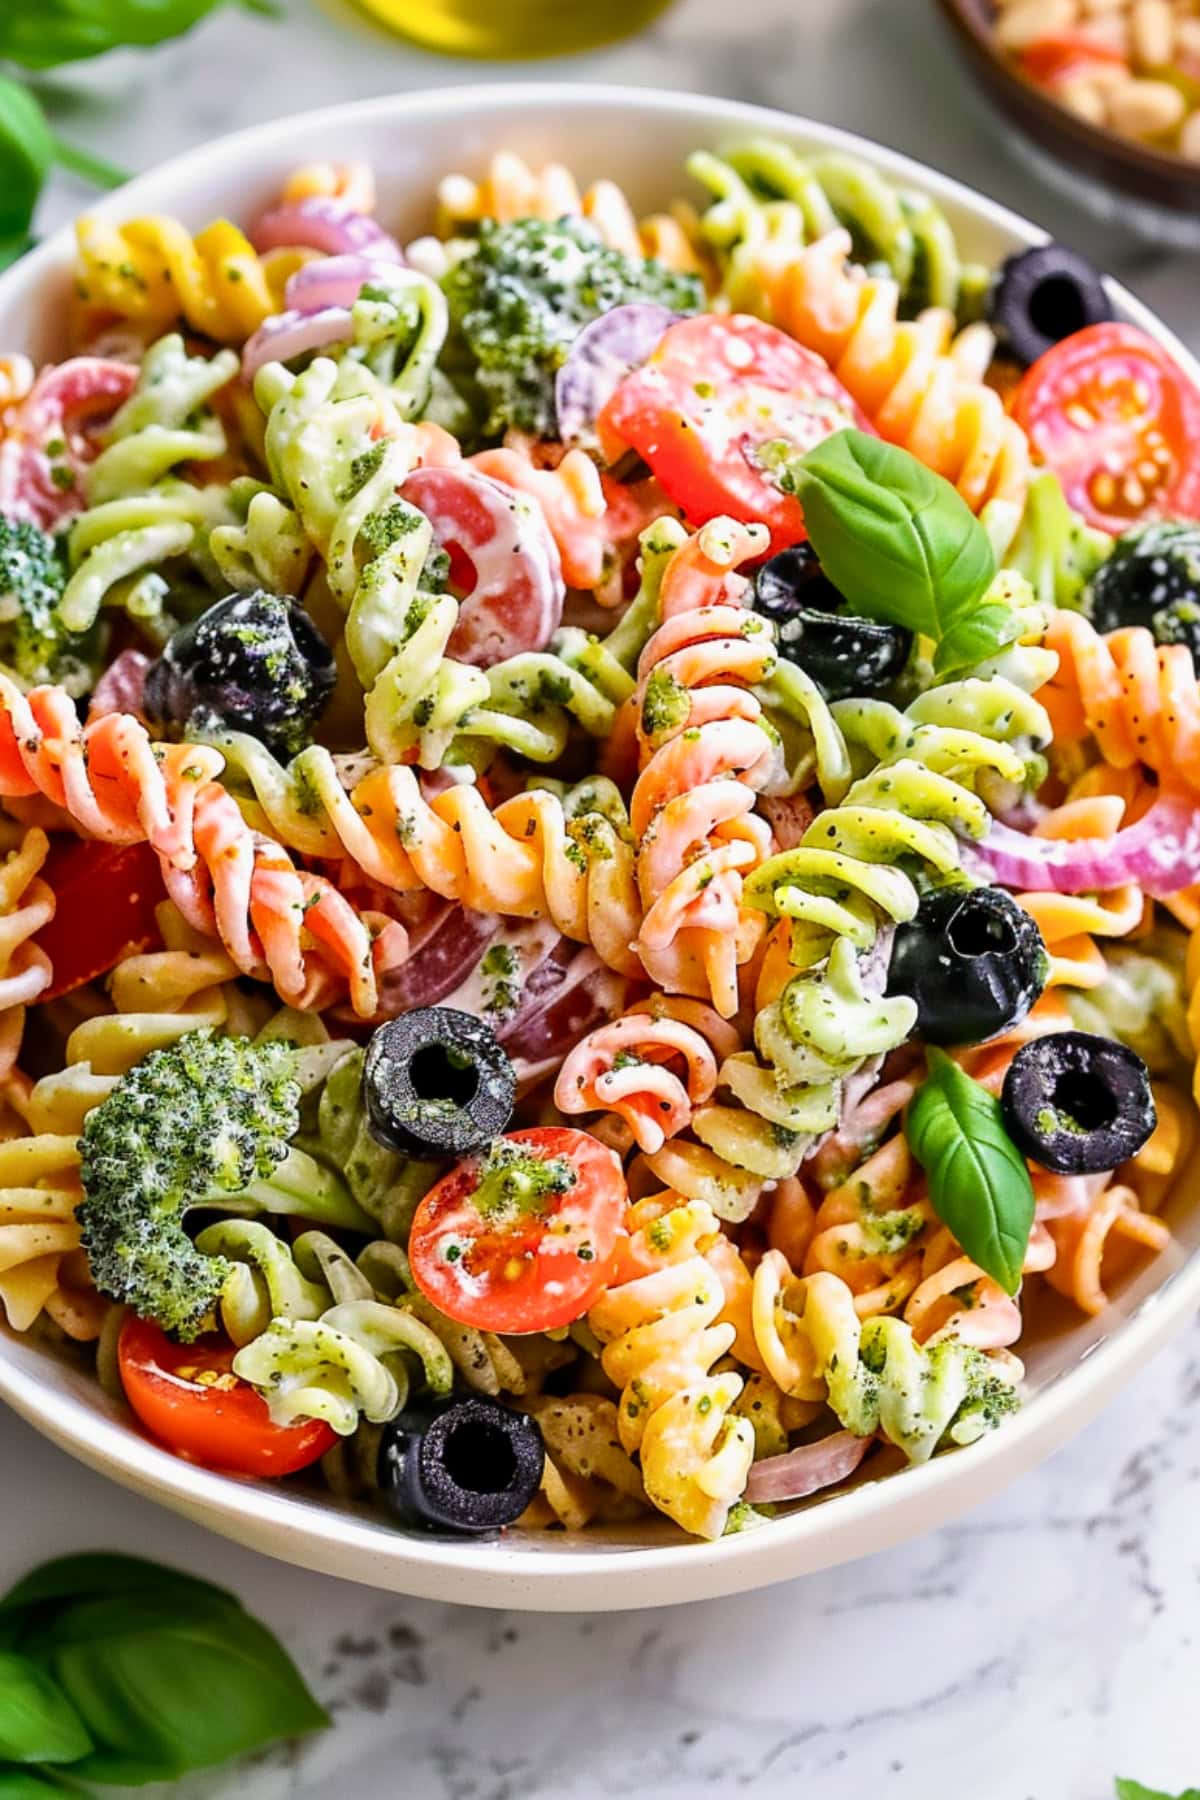 Bowl filled with serving of tricolor pasta coated in creamy caesar dressing.